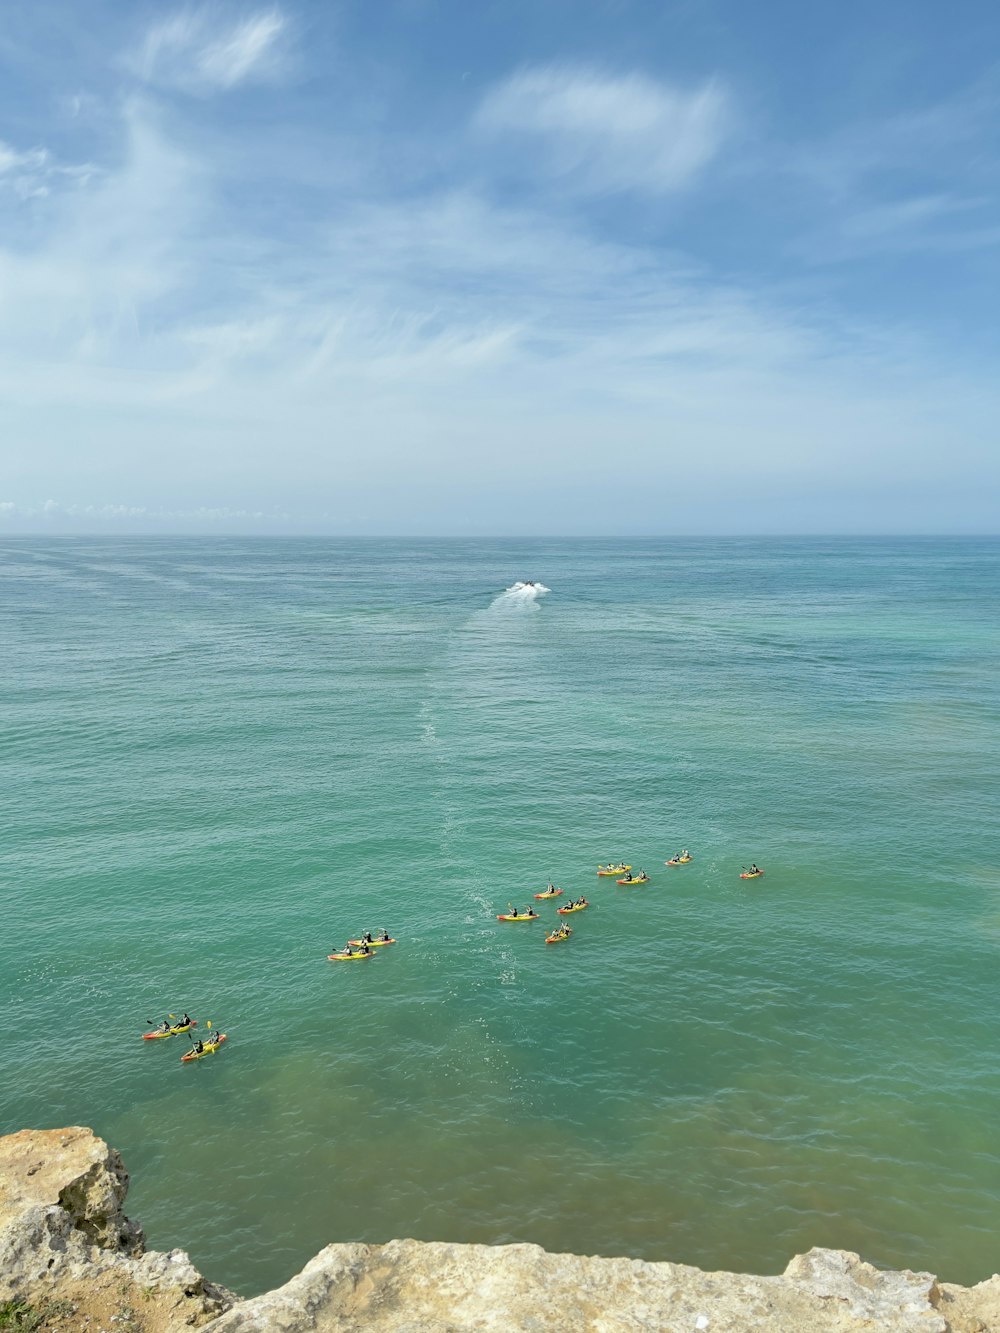 a group of people swimming in the ocean